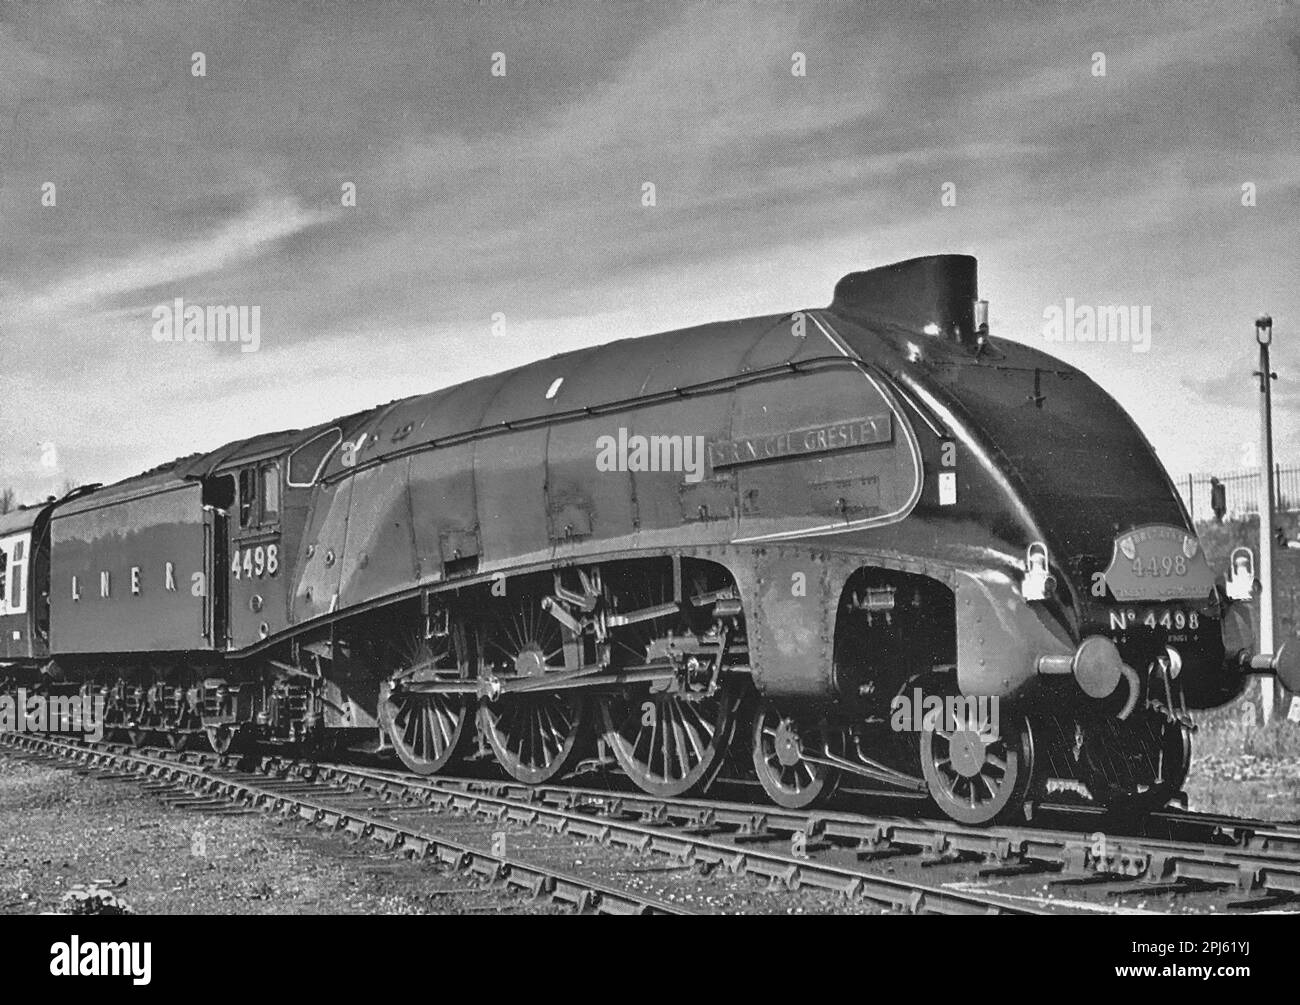 London North Eastern Railways Class A4 streamlined Pacific steam train introduced in 1935 by Sir Nigel Gresley as shown here. The sister train Mallard held the record for the fastest steam train travelling at 126mph Stock Photo